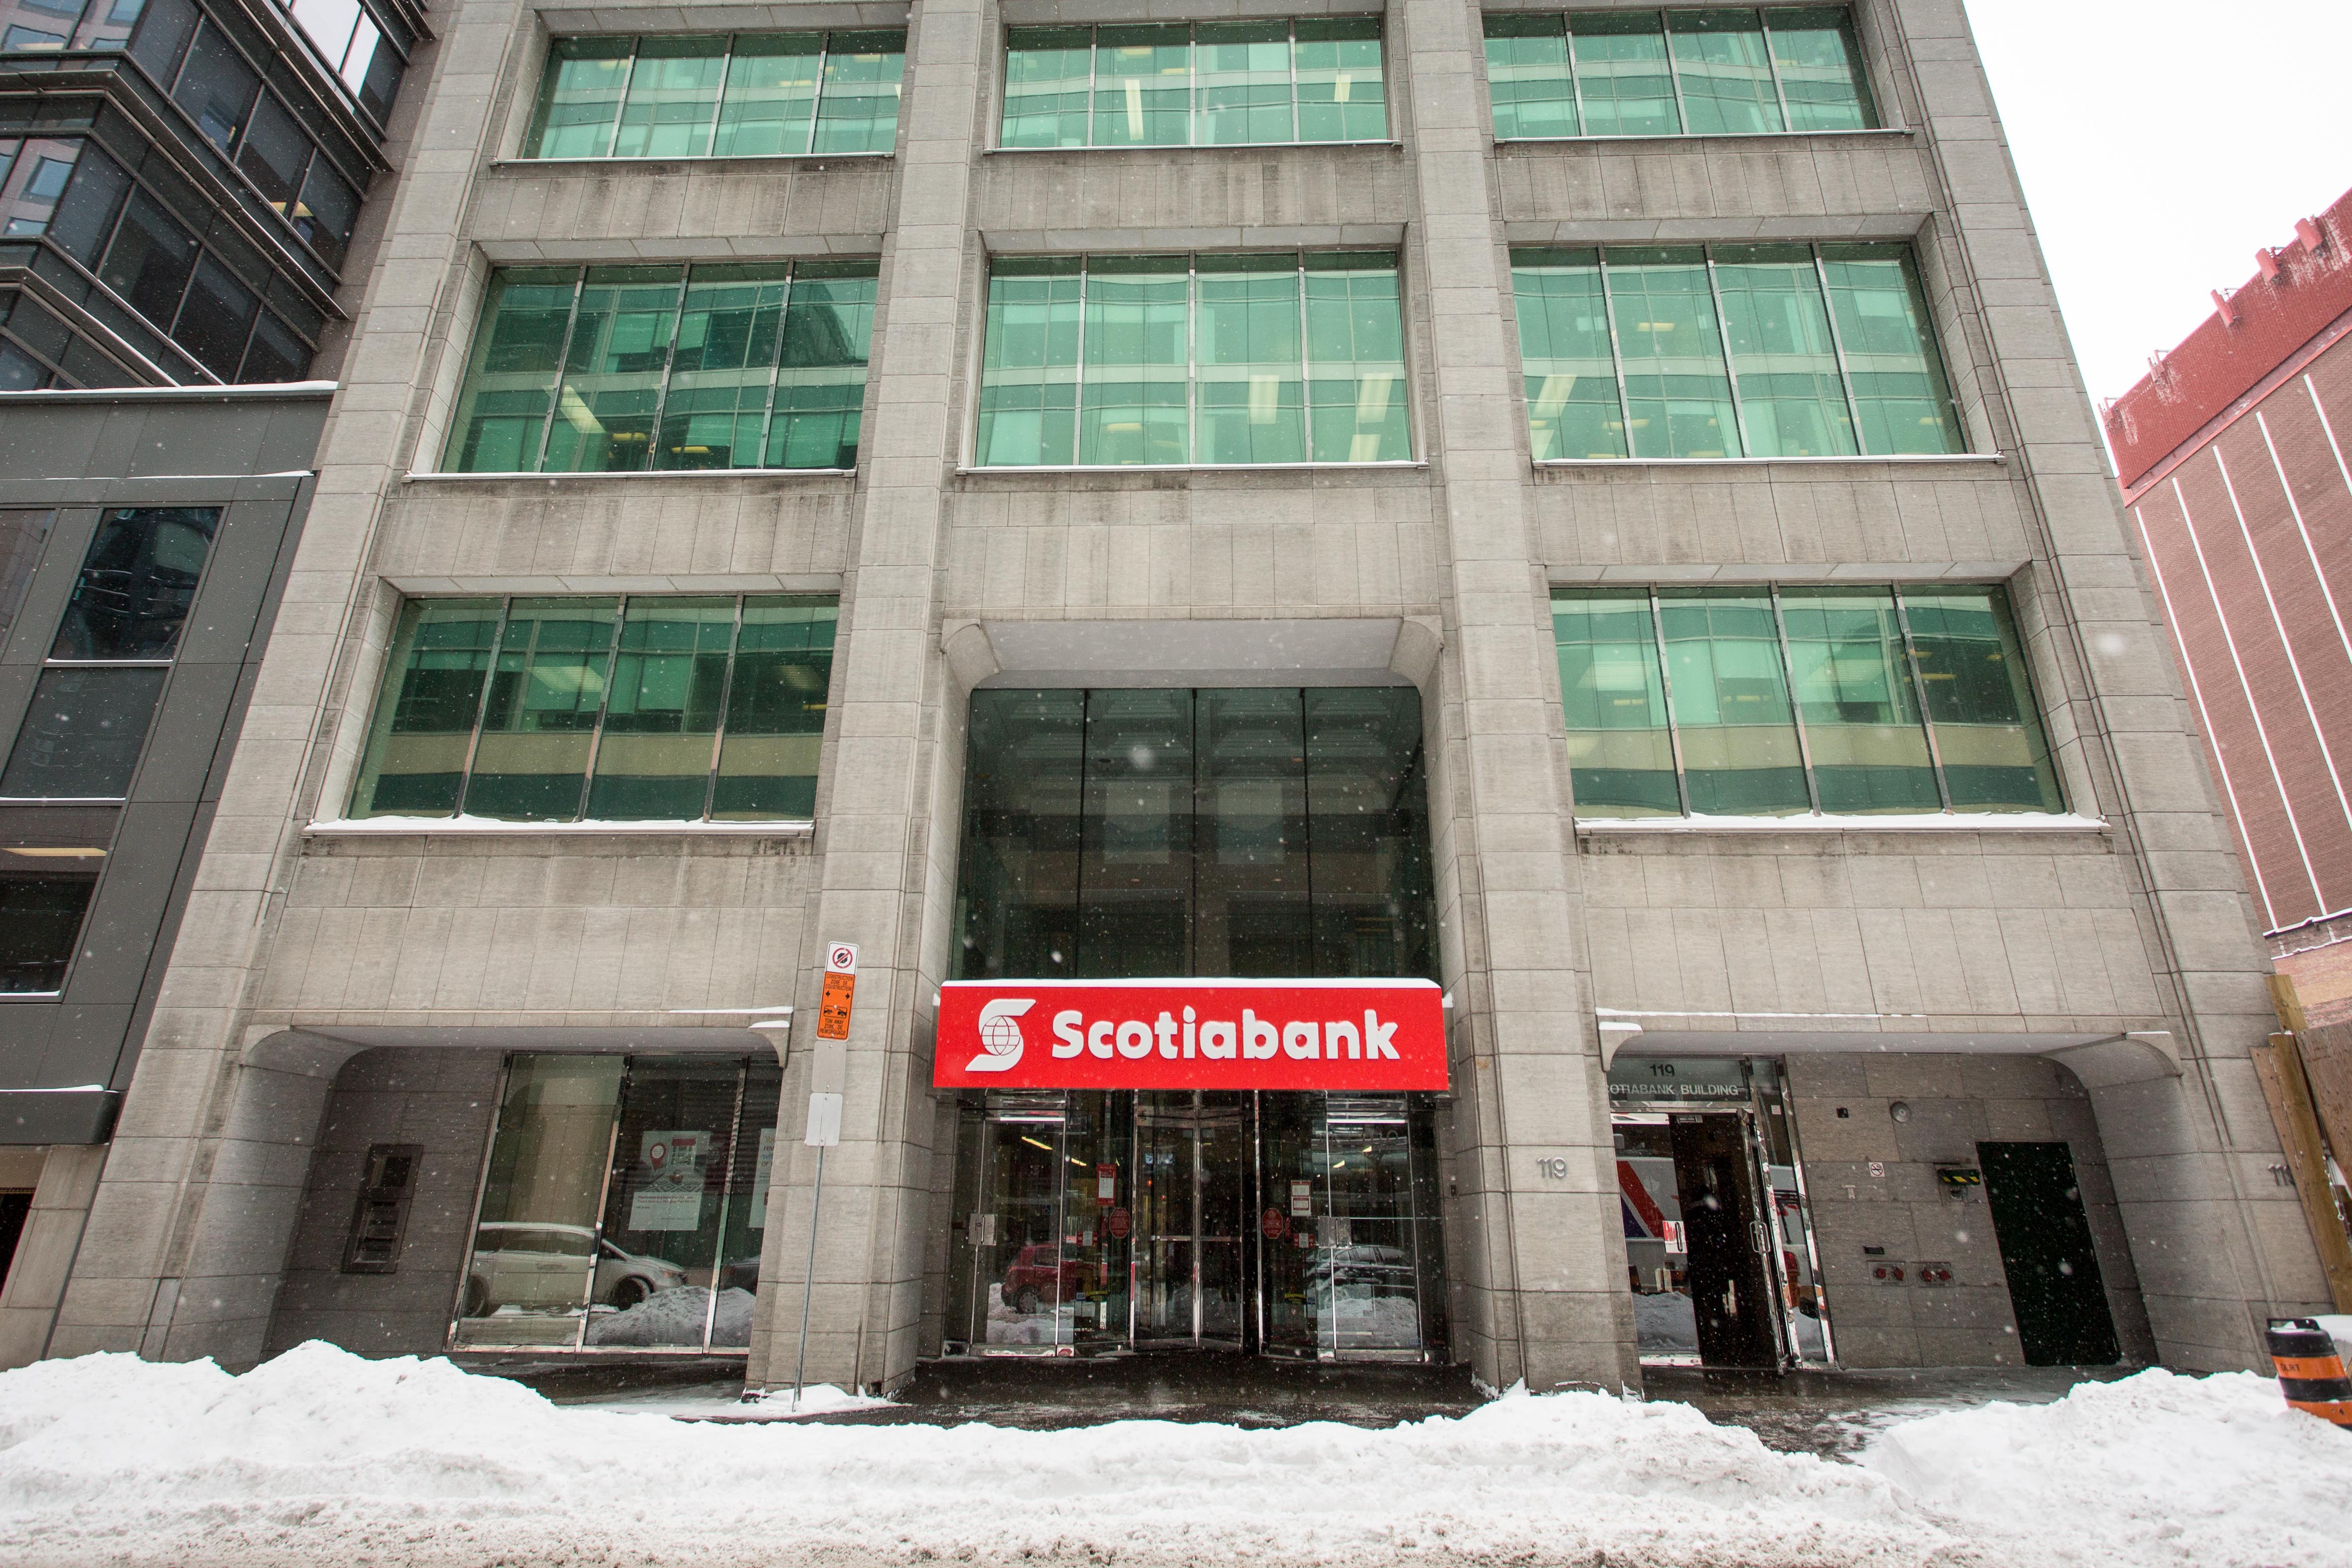 Noted fossil-fuel backer Scotiabank announces $100B climate investment - National Observer